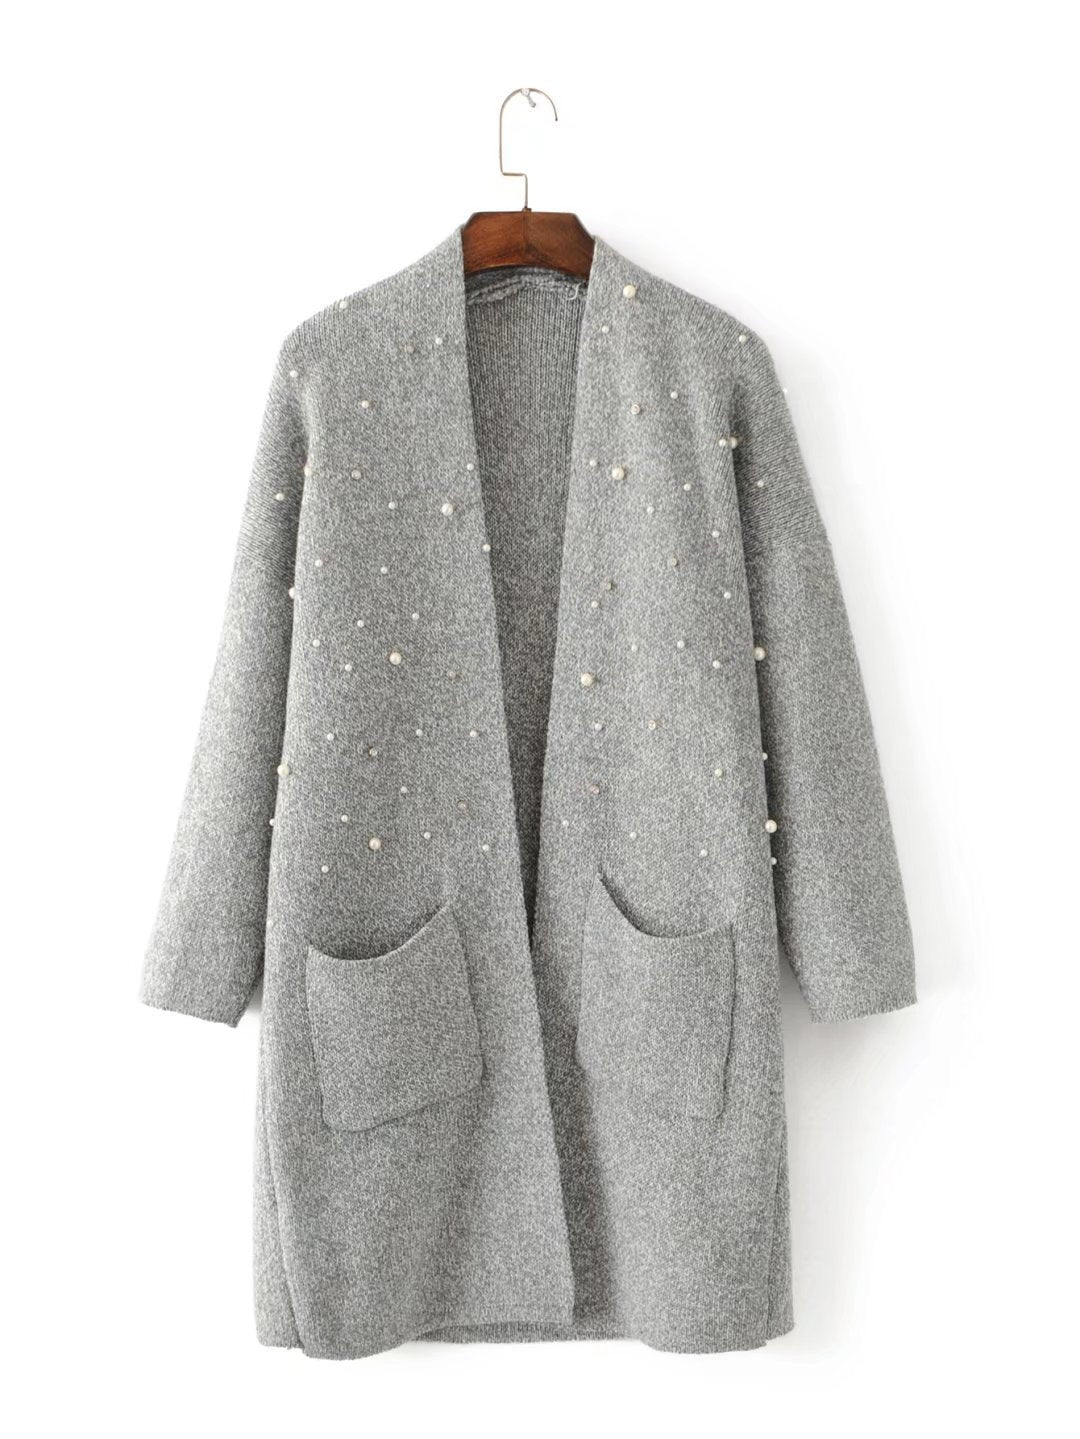 Pearl Decorated Long Cardigan Sweater